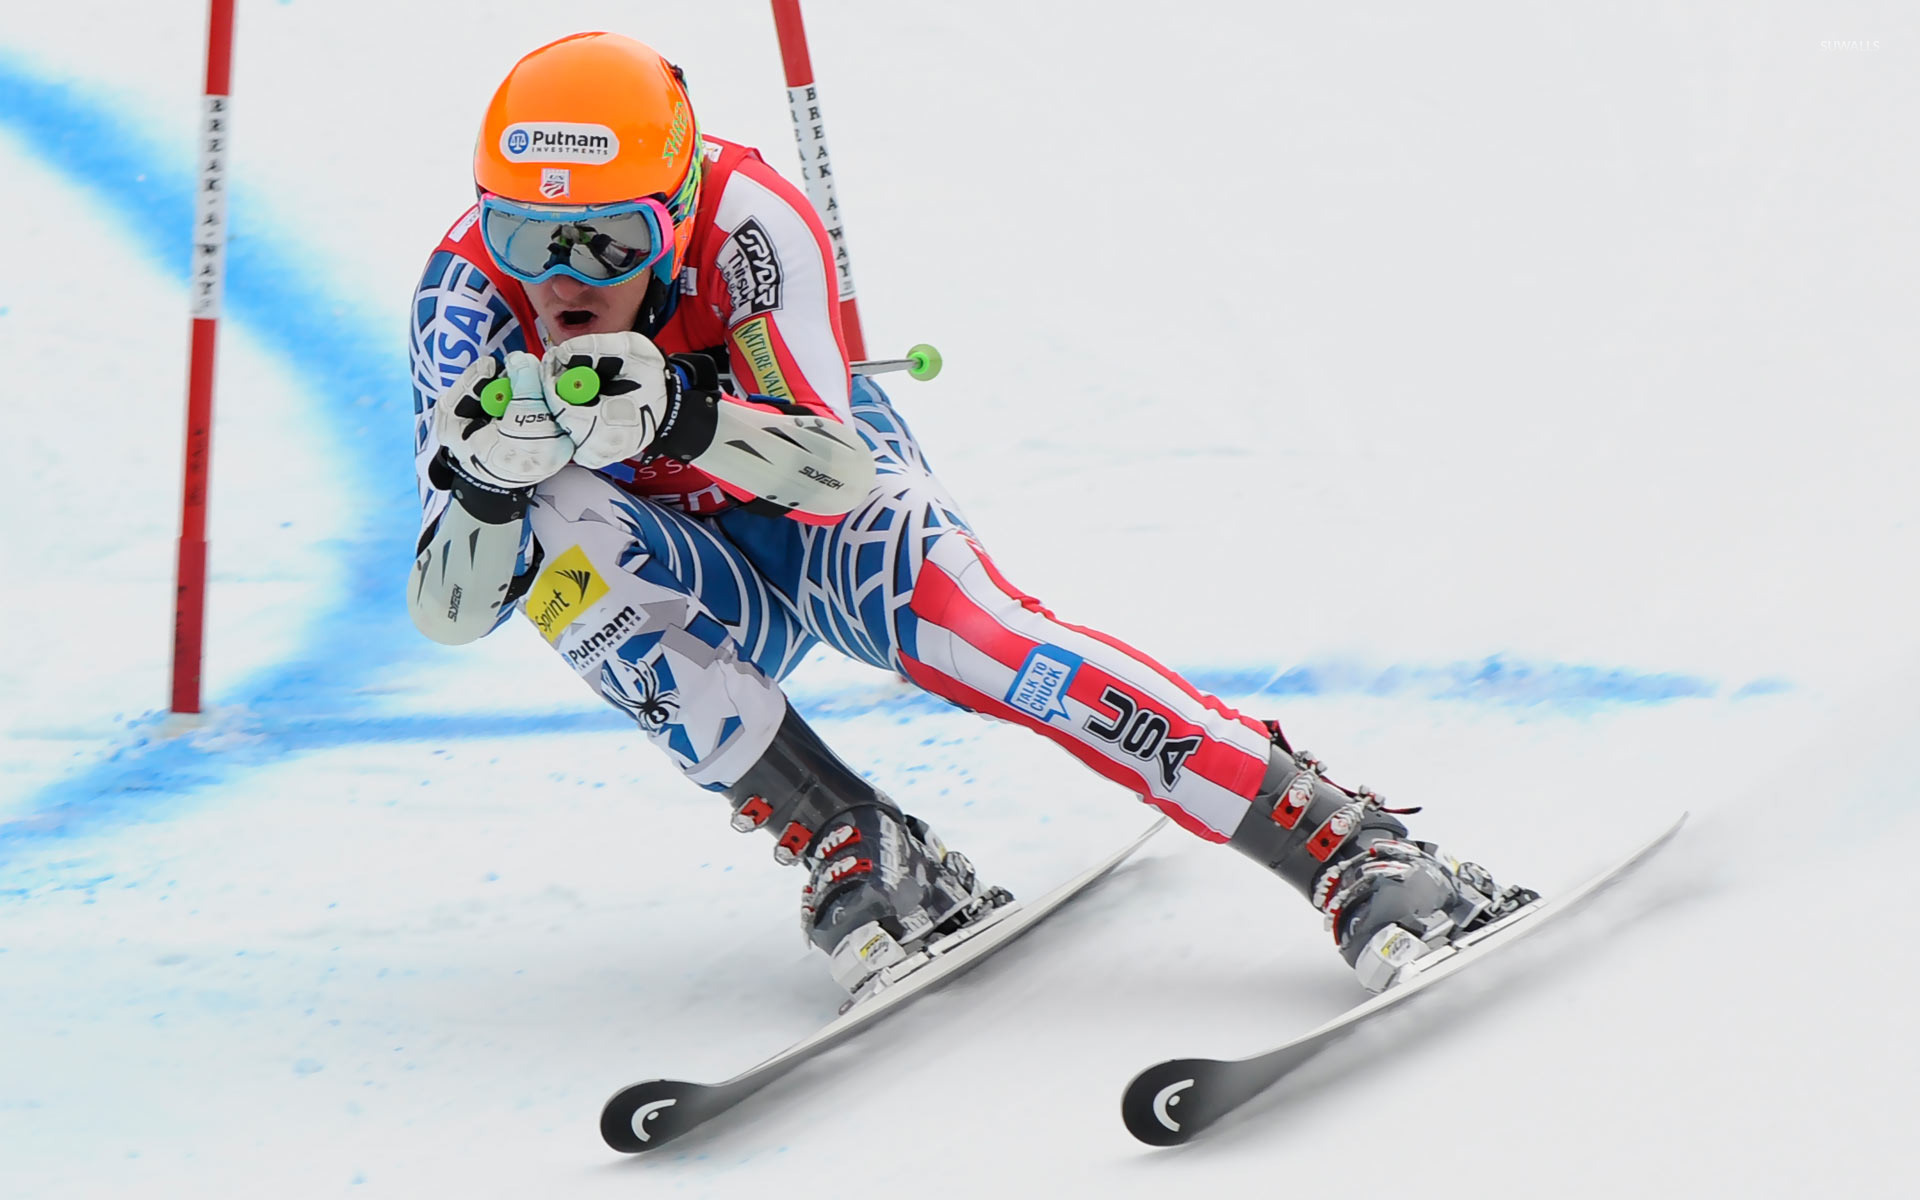 Slalom: Race on skis around obstacles, Ted Ligety, Cyclic winter sports, Downhill. 1920x1200 HD Wallpaper.